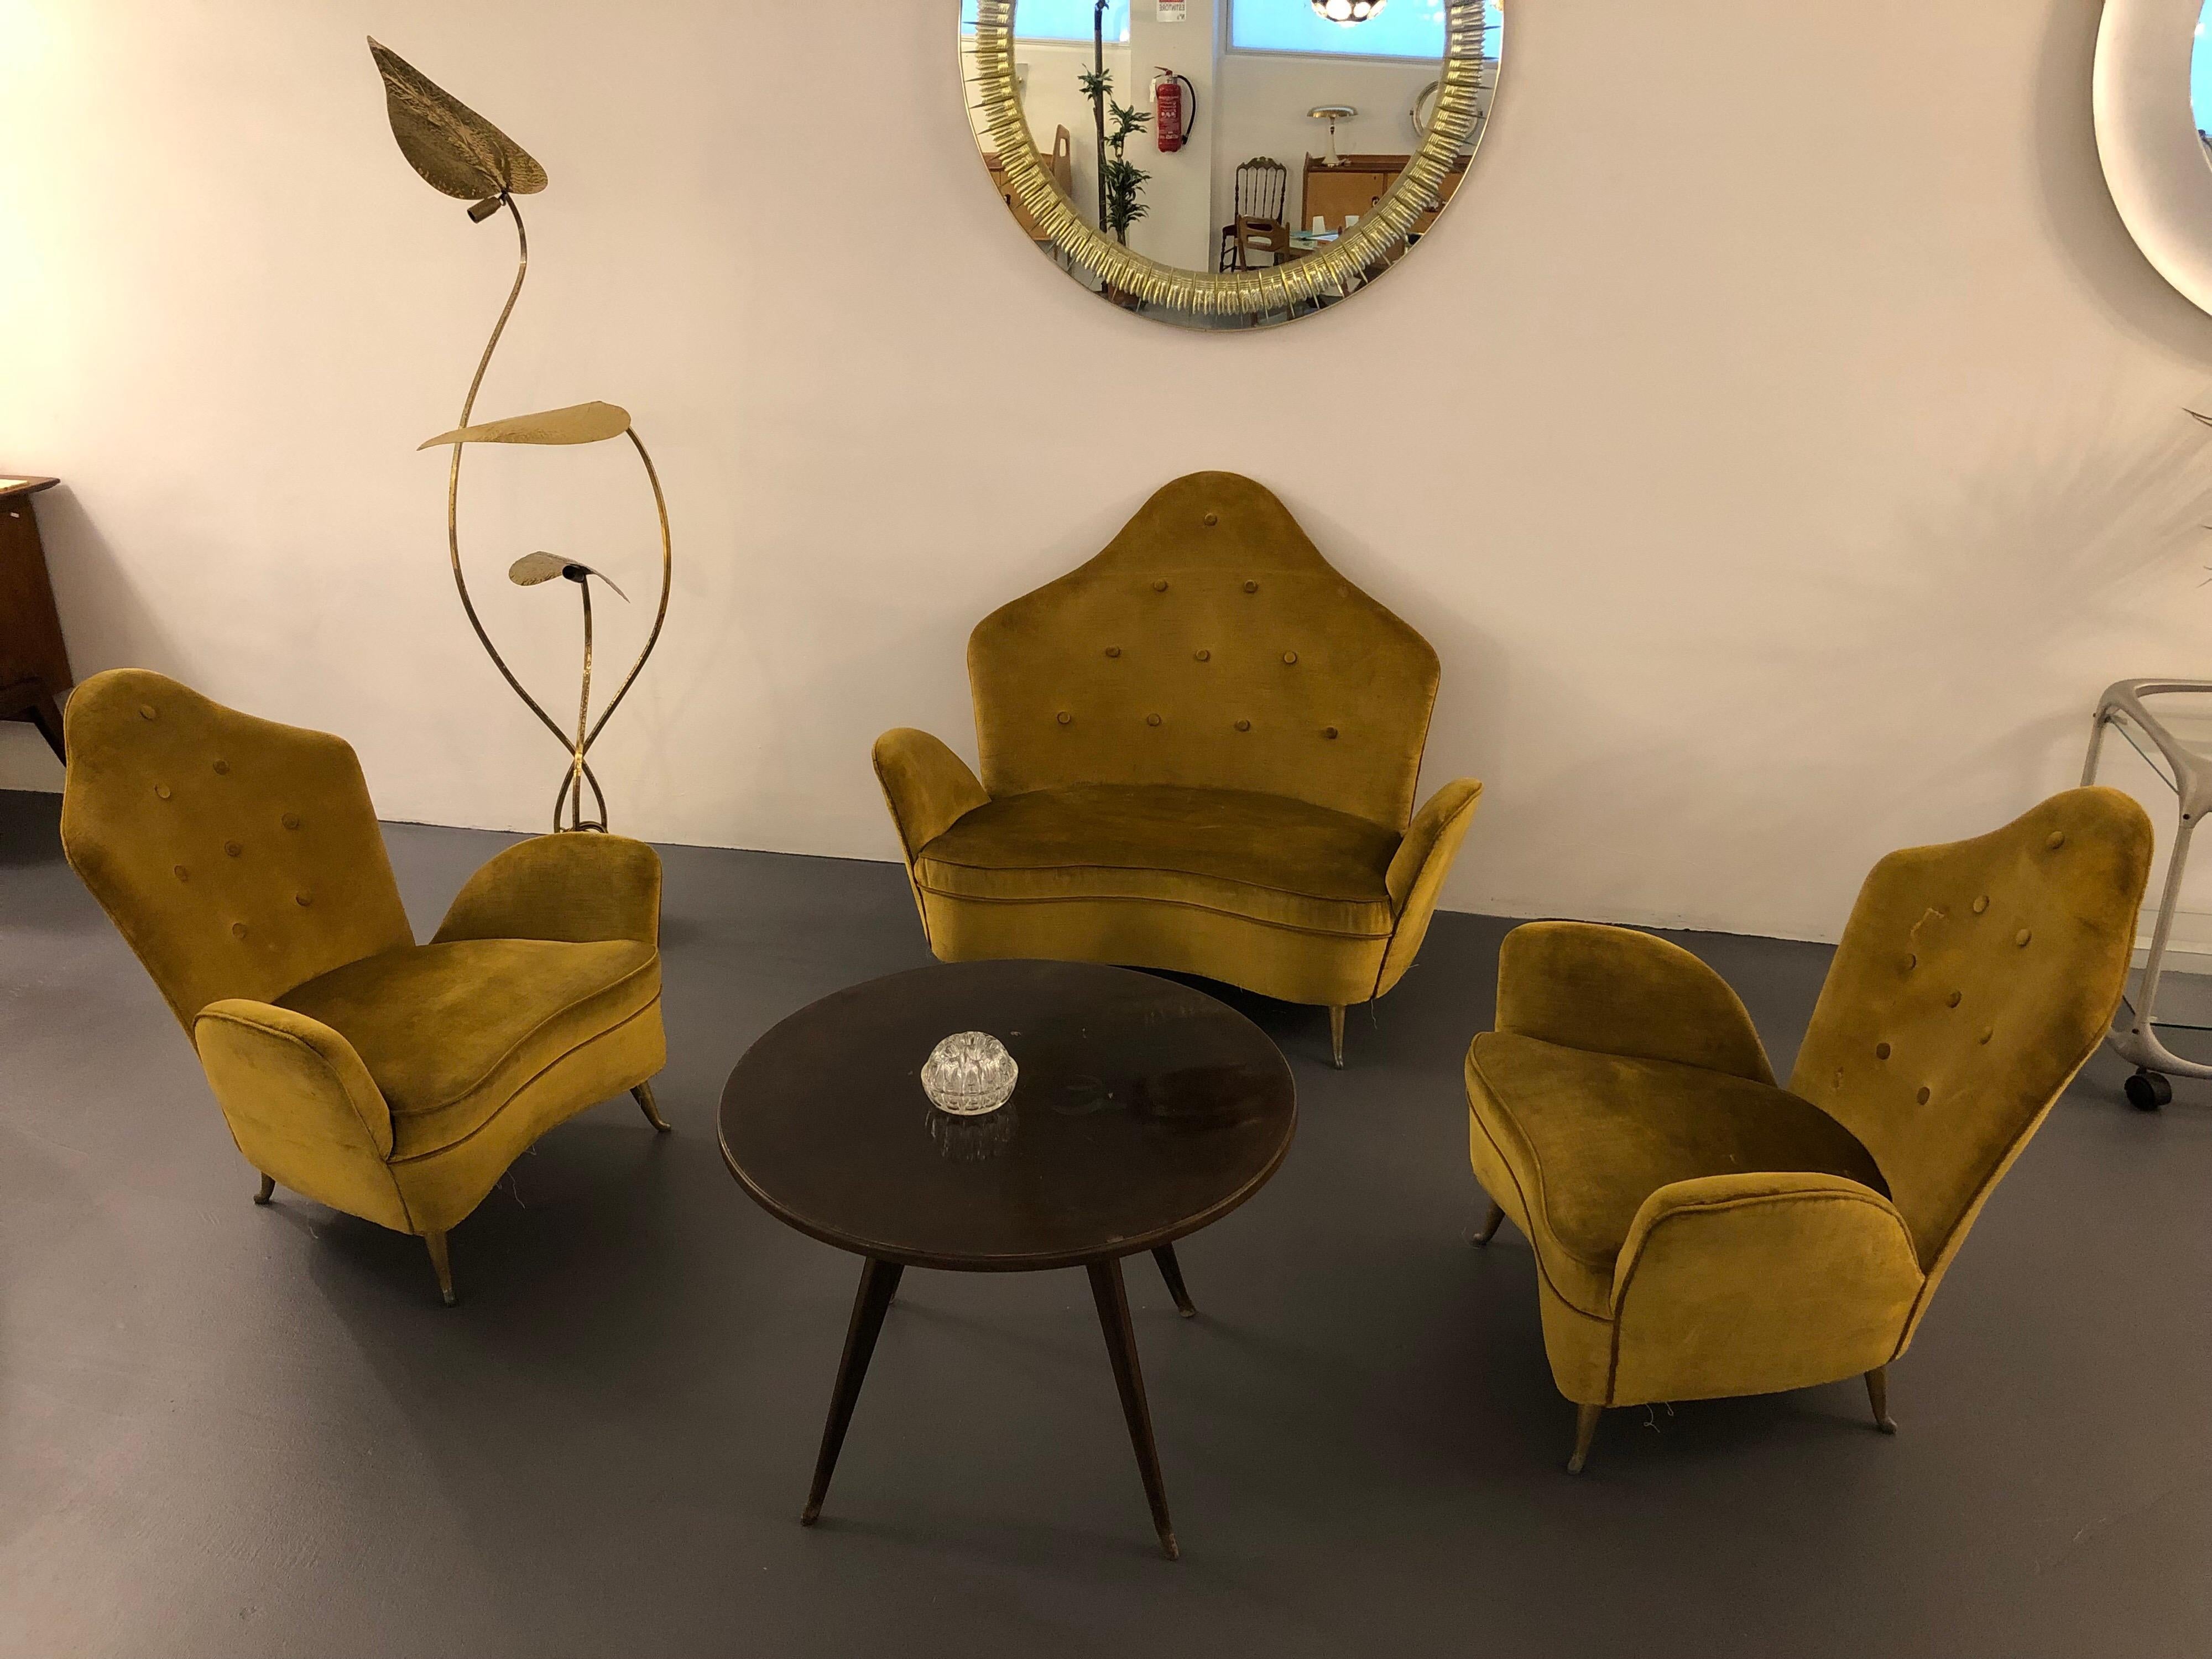 Charming salon set by Isa Bergamo and composed by a sofa and a matching pair of armchairs. Original mustard yellow velvet upholstery. Made in Italy, 1950s.
Dimensions:
Sofa - height 91 cm, seat height 35 cm, depth 77 cm, width 112 cm
Armchair -